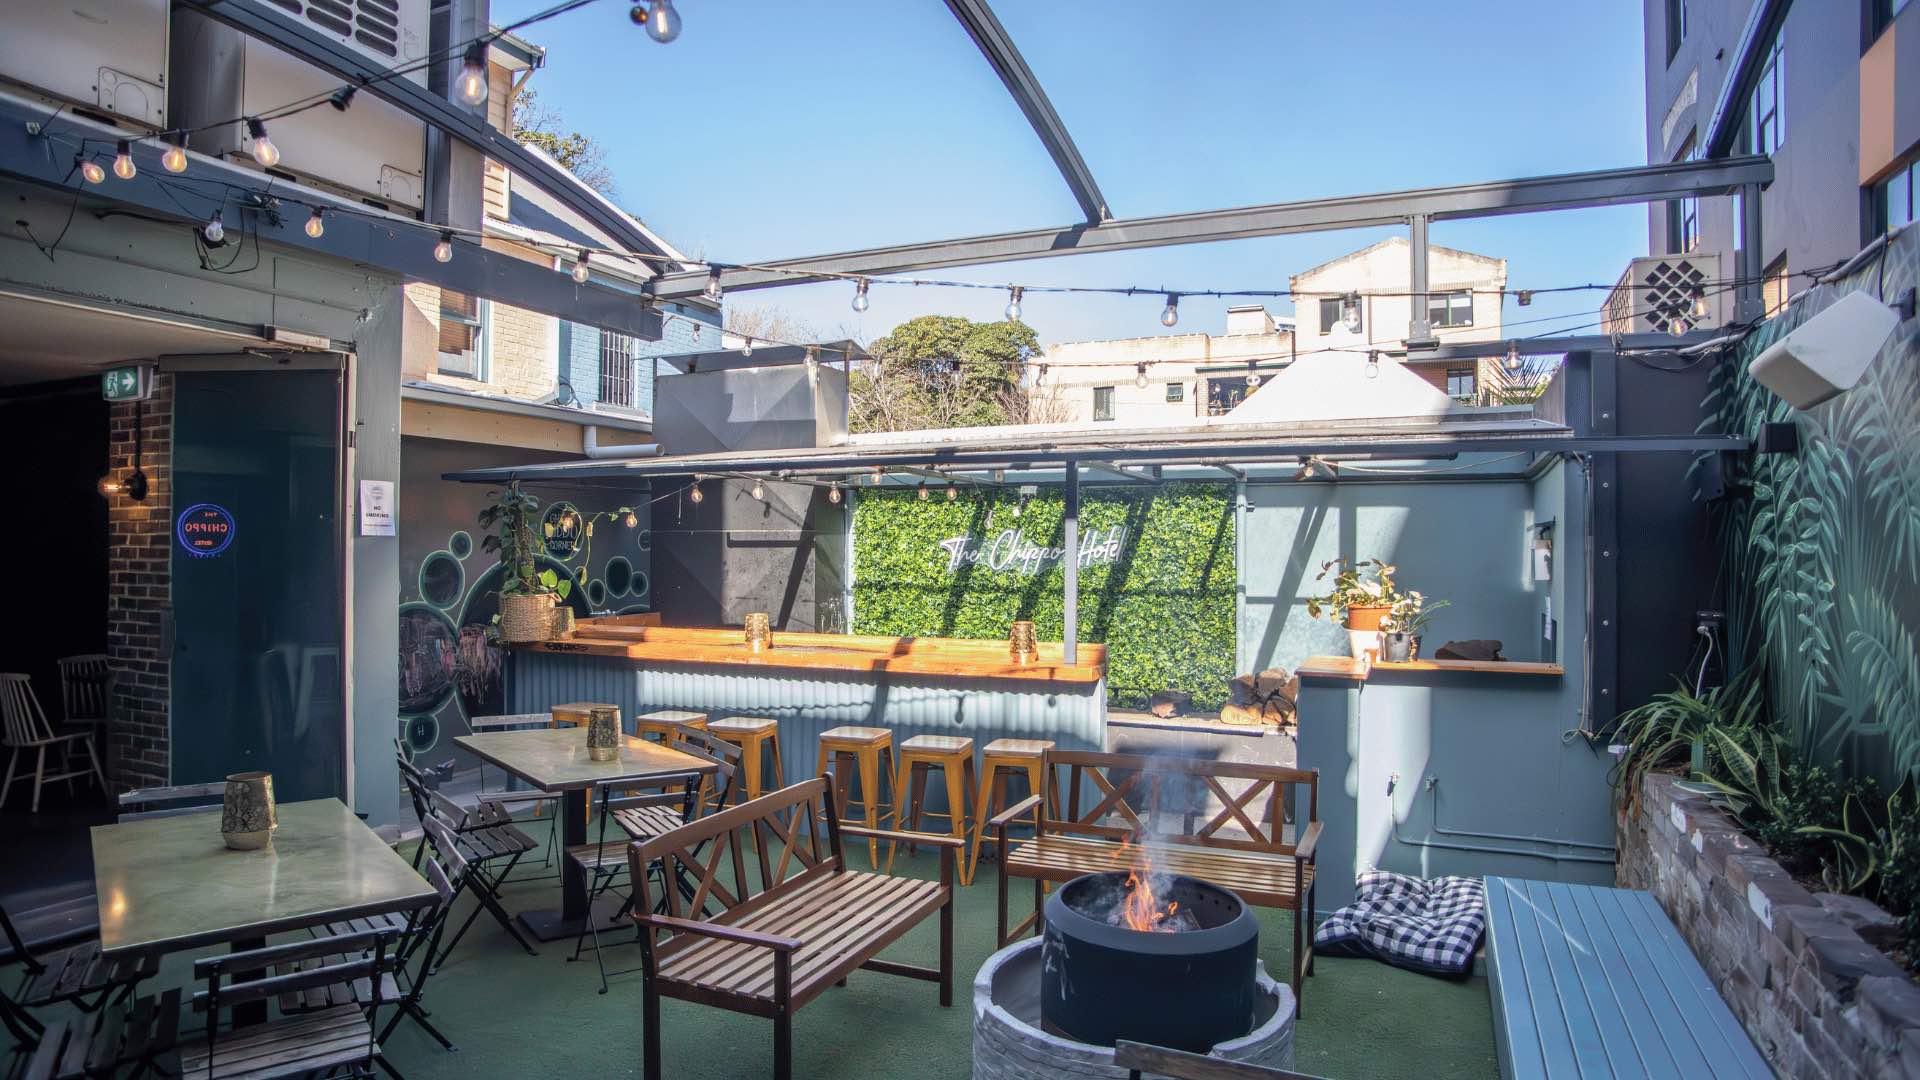 Photo of the open-air rooftop bar at The Chippo Hotel.